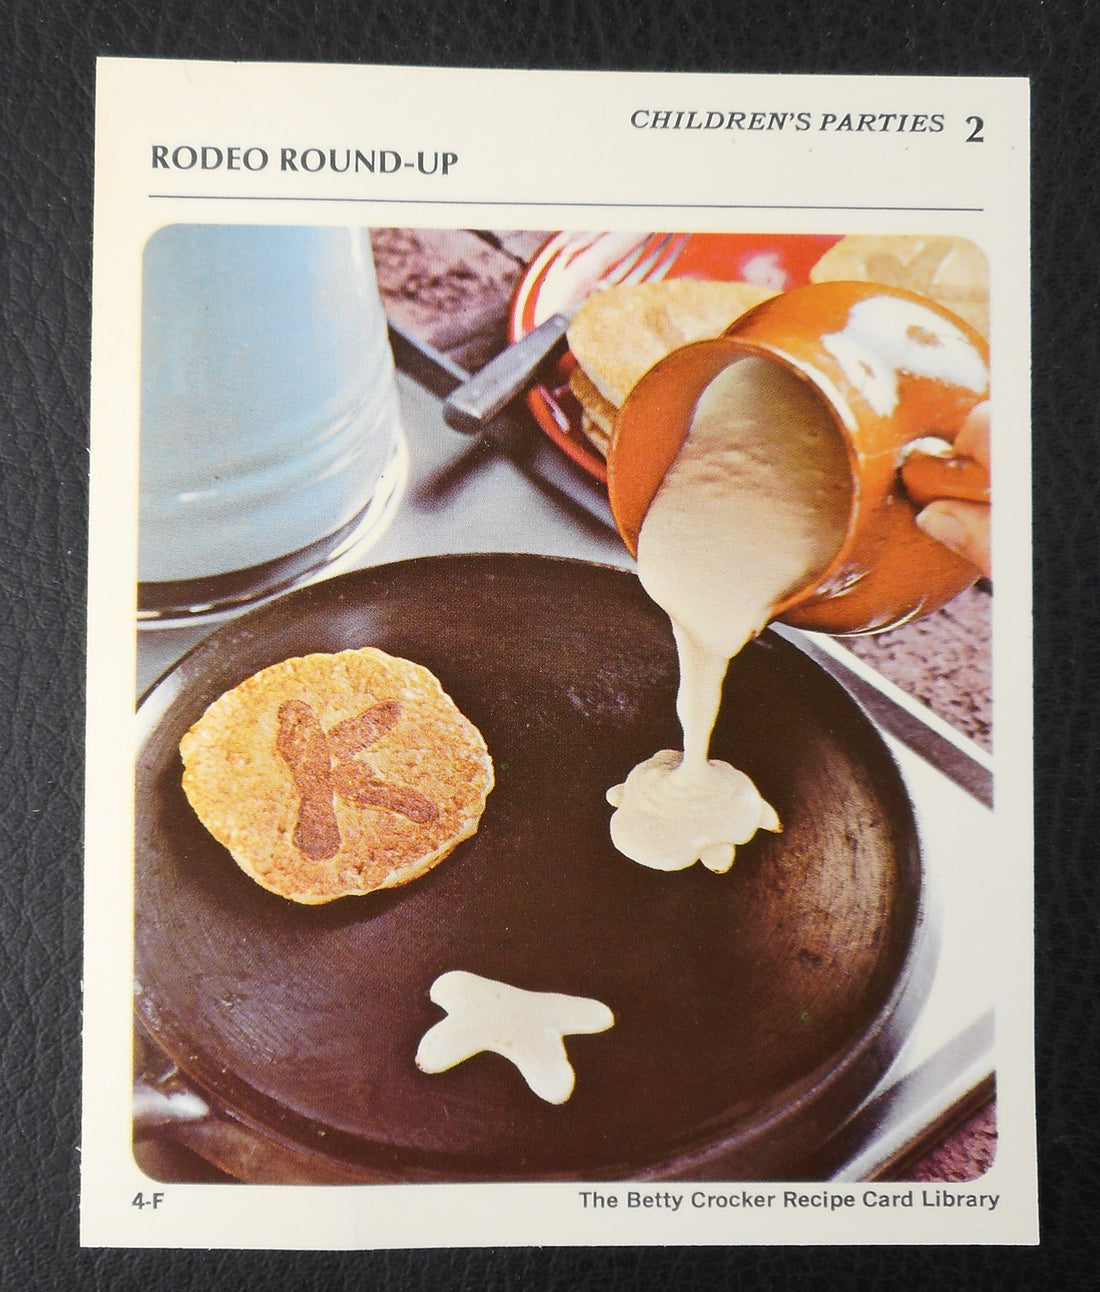 Vintage Betty Crocker Recipe Card - Rodeo Round-Up Cast Iron Griddle Pancakes